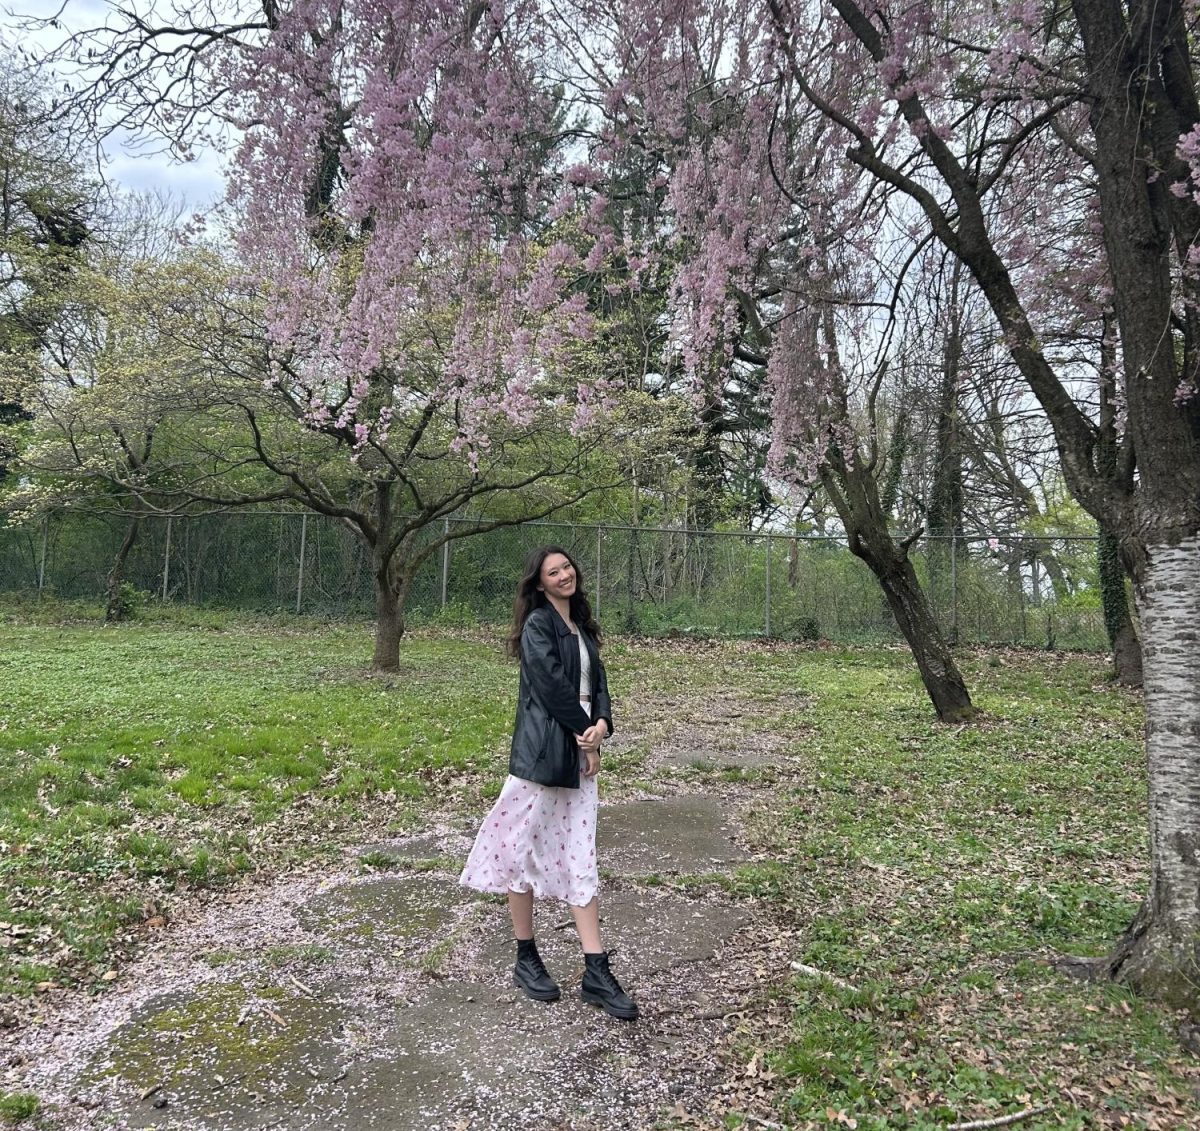 Hannah Pajtis ’26 poses with cherry blossom trees at the 2024 Subaru Cherry Blossom Festival in West
Fairmount Park, April 13. PHOTOS: OLIVIA FISHER ’26